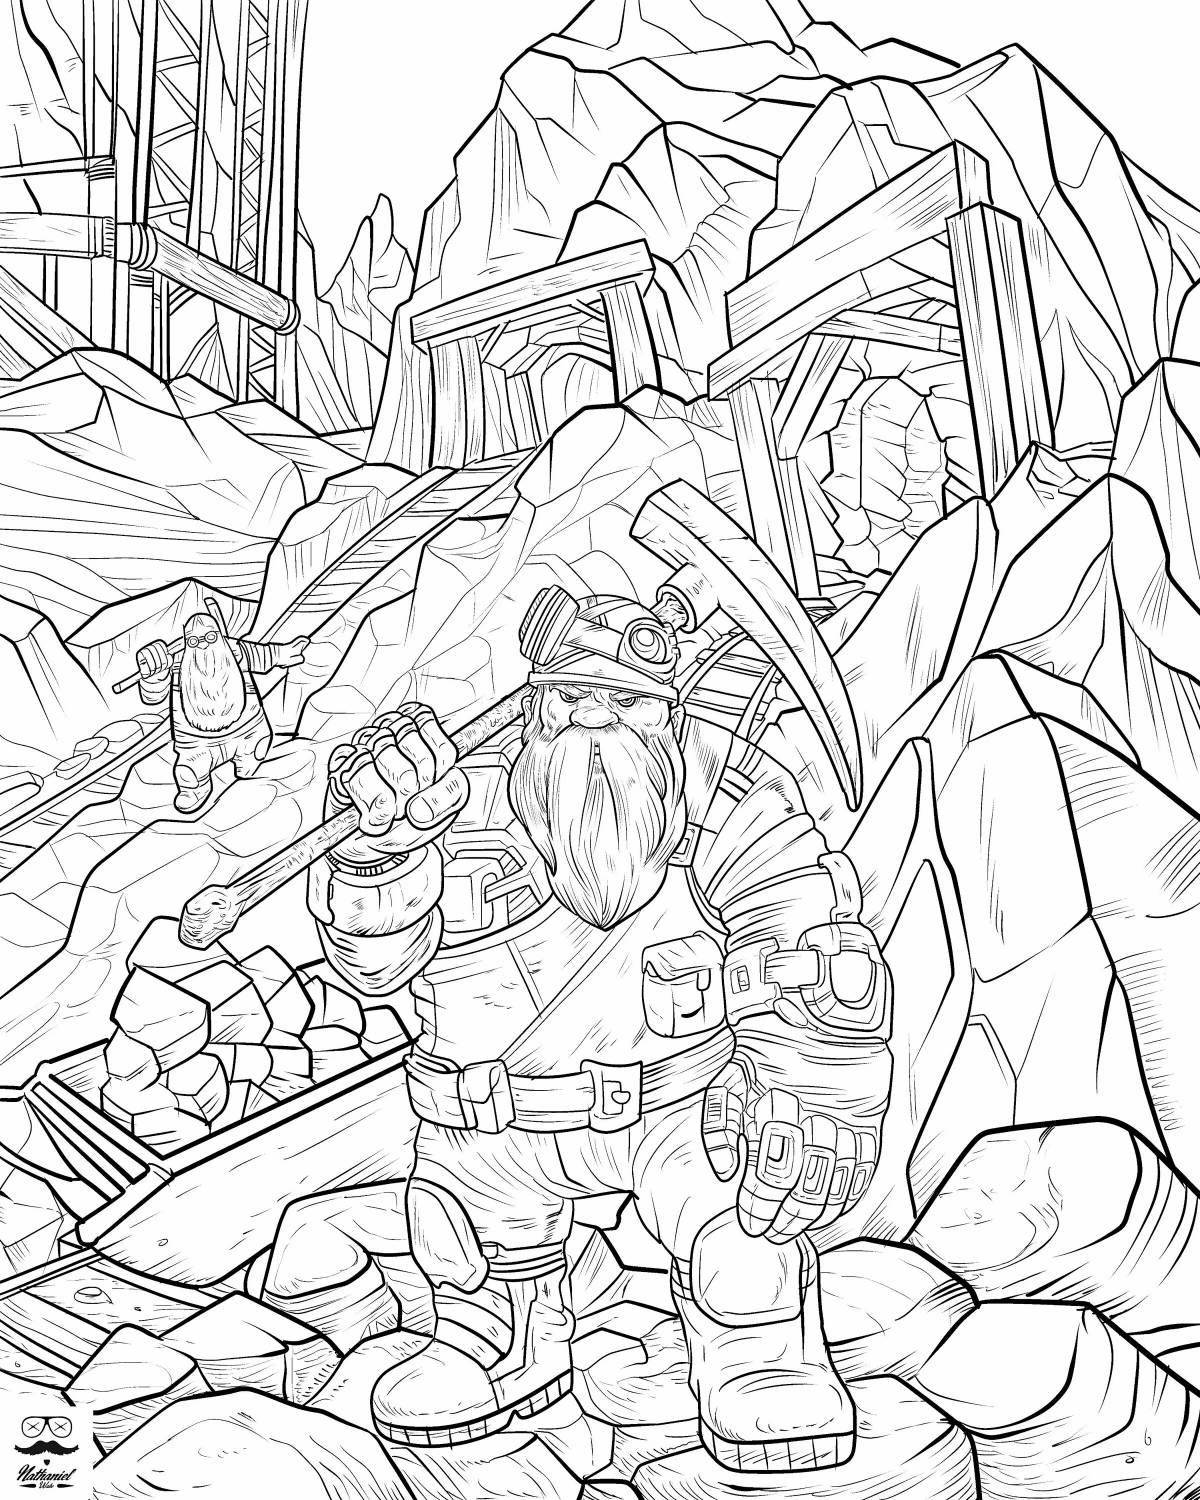 Colorful world of warcraft coloring book